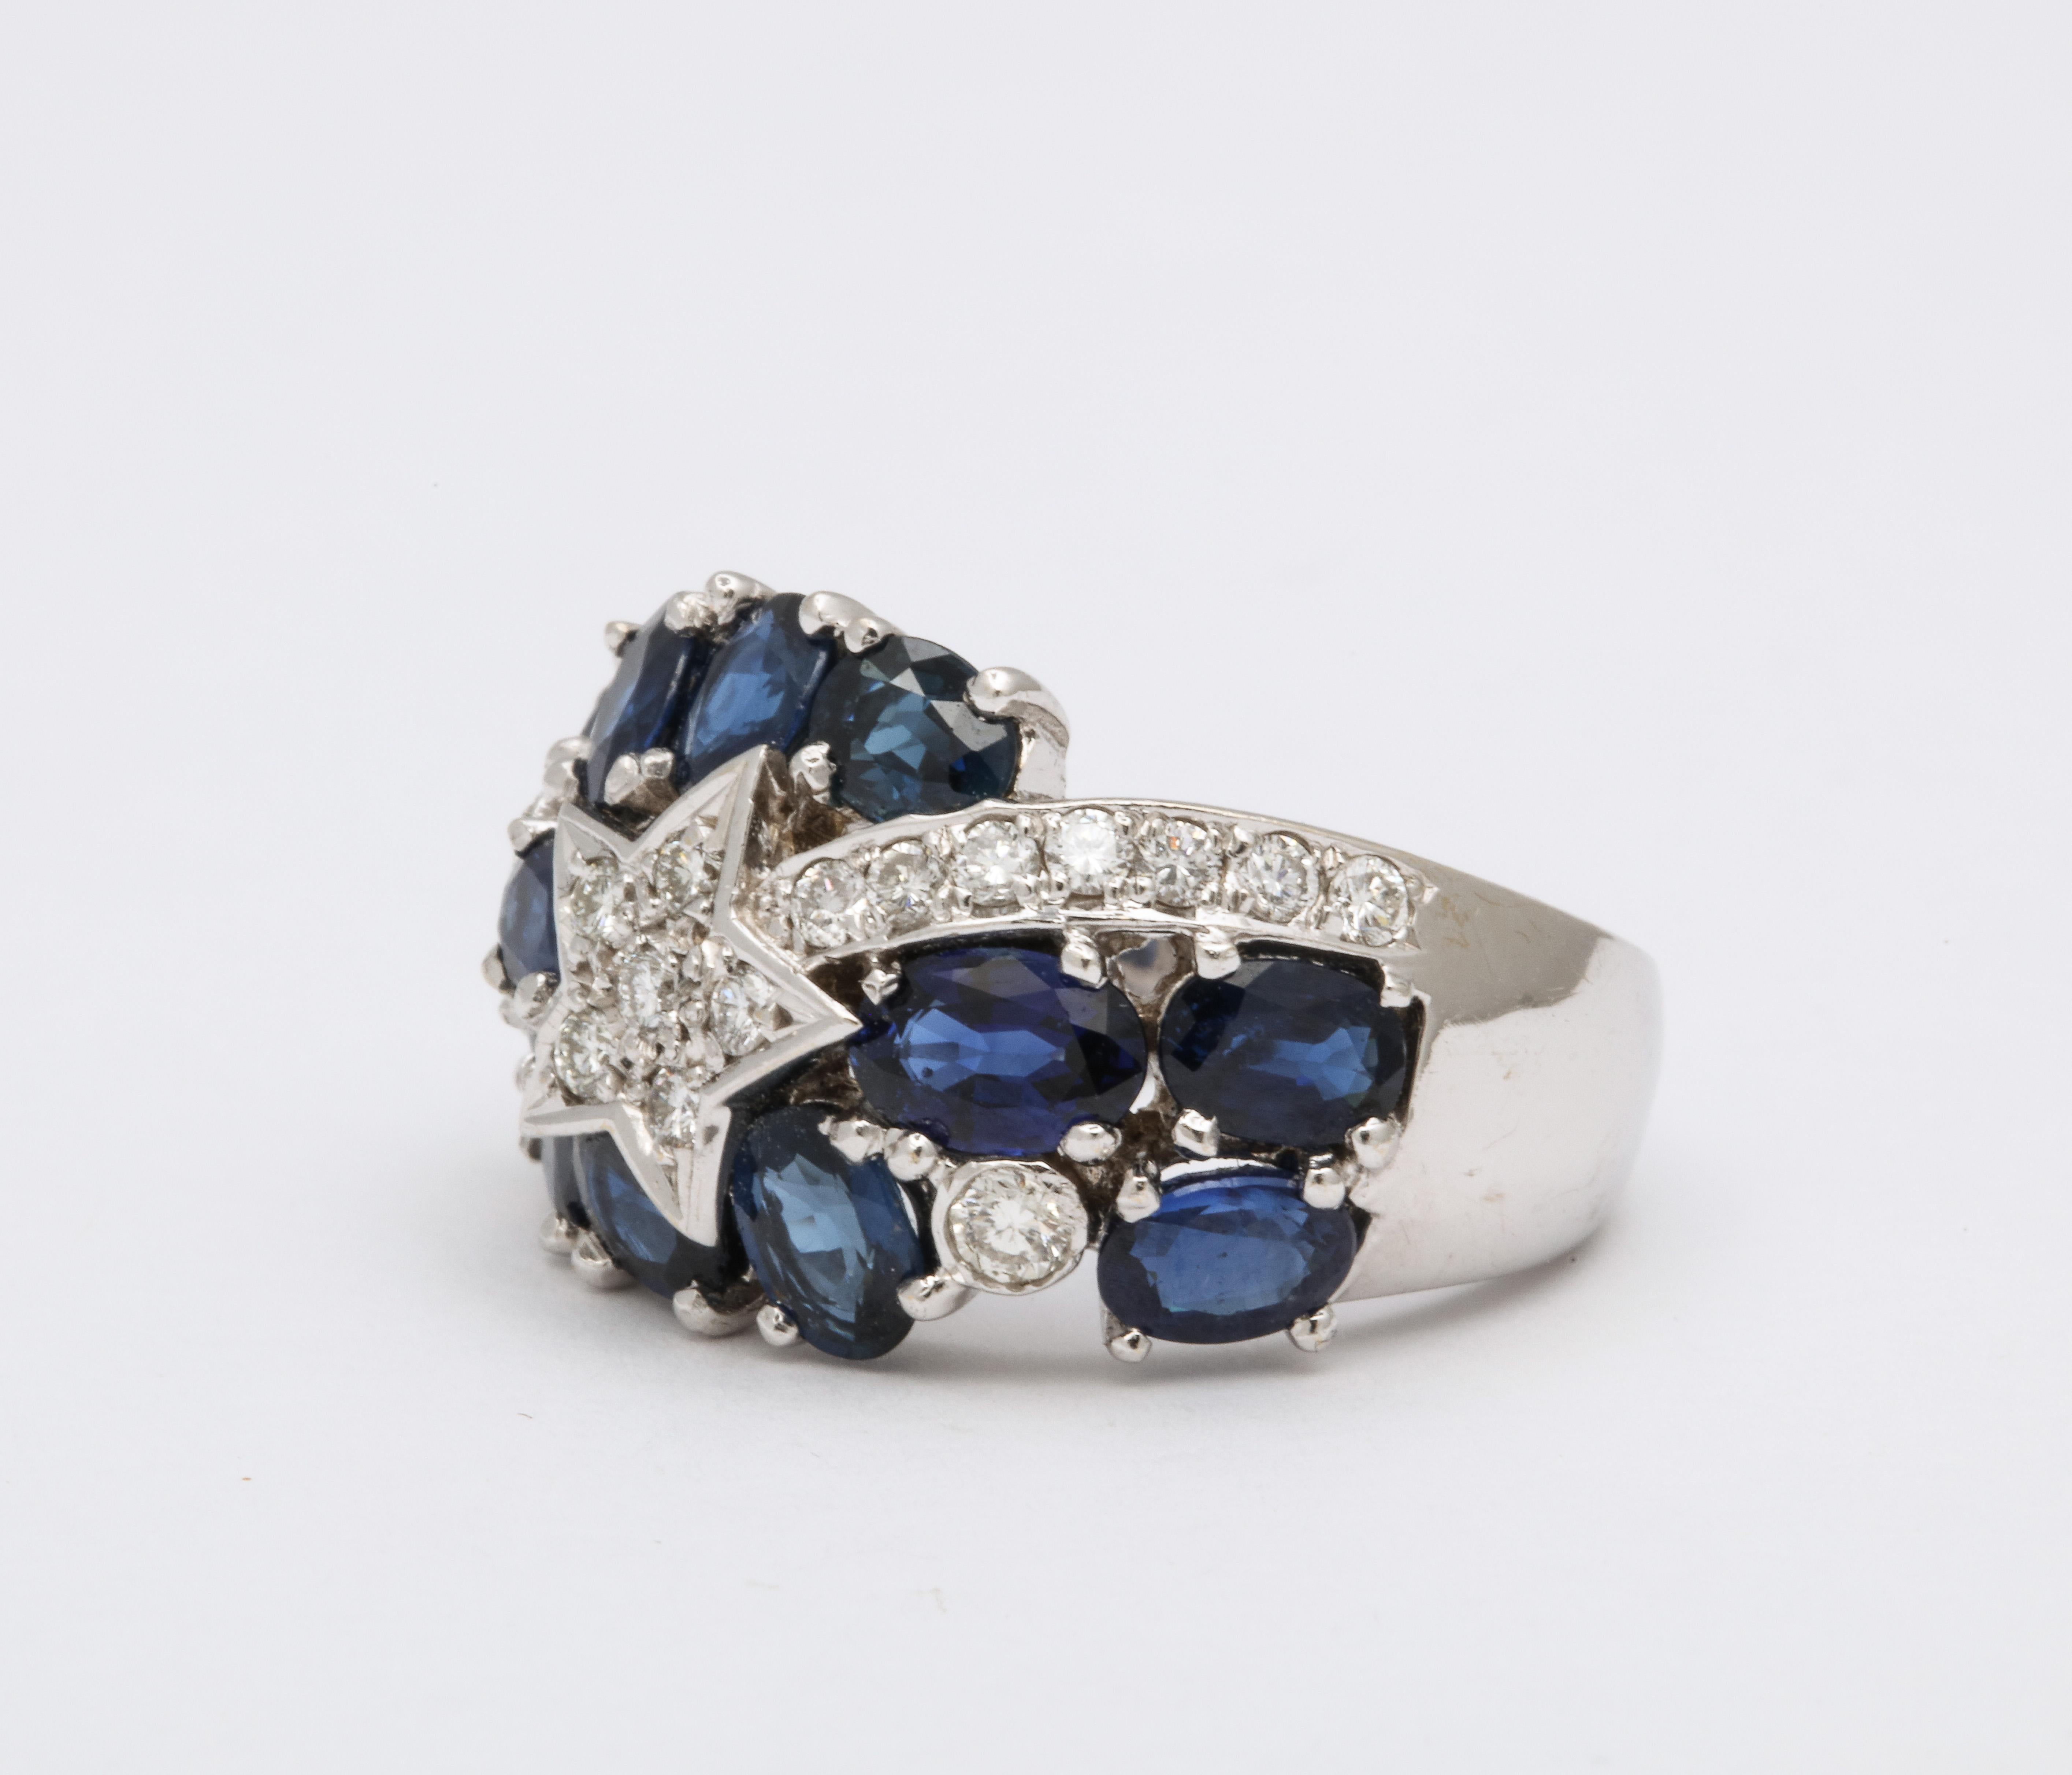 
A special and unique ring.

4.83 carats of blue sapphire 

.40 carats of white round brilliant cut diamonds 

18k white gold

Over 14mm wide

Currently a size 6.5, this ring can easily be resized. 